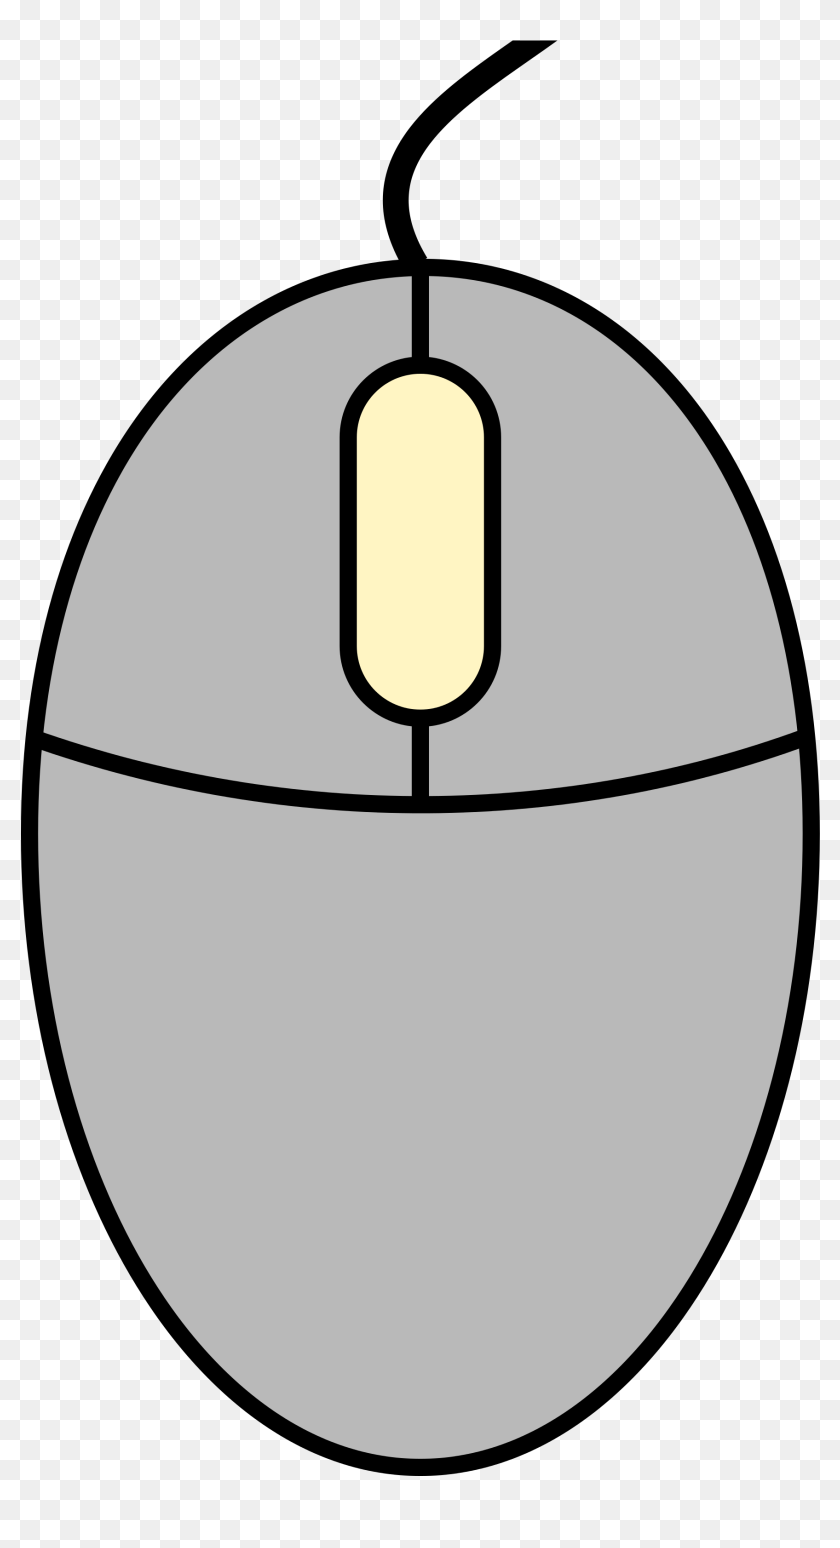 pc mouse clipart picture